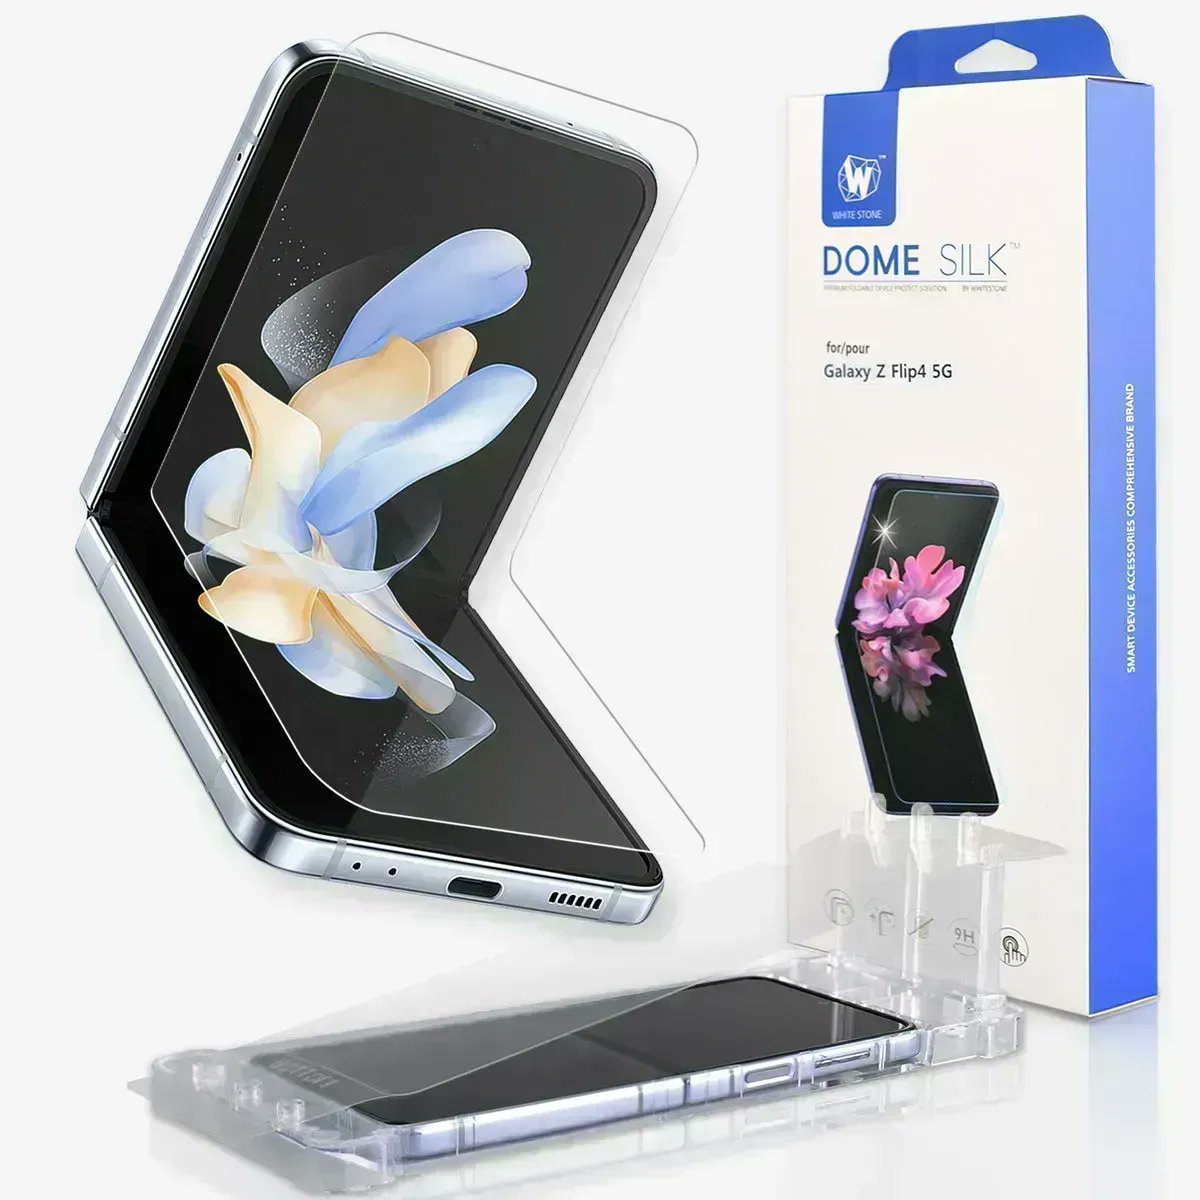 Must Have Accessories for Samsung Galaxy Z Flip 4 https://t.co/JLoX5QmwTY via @YouTube 

[Dome Silk] Samsung Galaxy Z Flip 4 UTG Screen Protector - Ultra Thin Glass https://t.co/dikxbJAbAM https://t.co/sV20RFbBdX